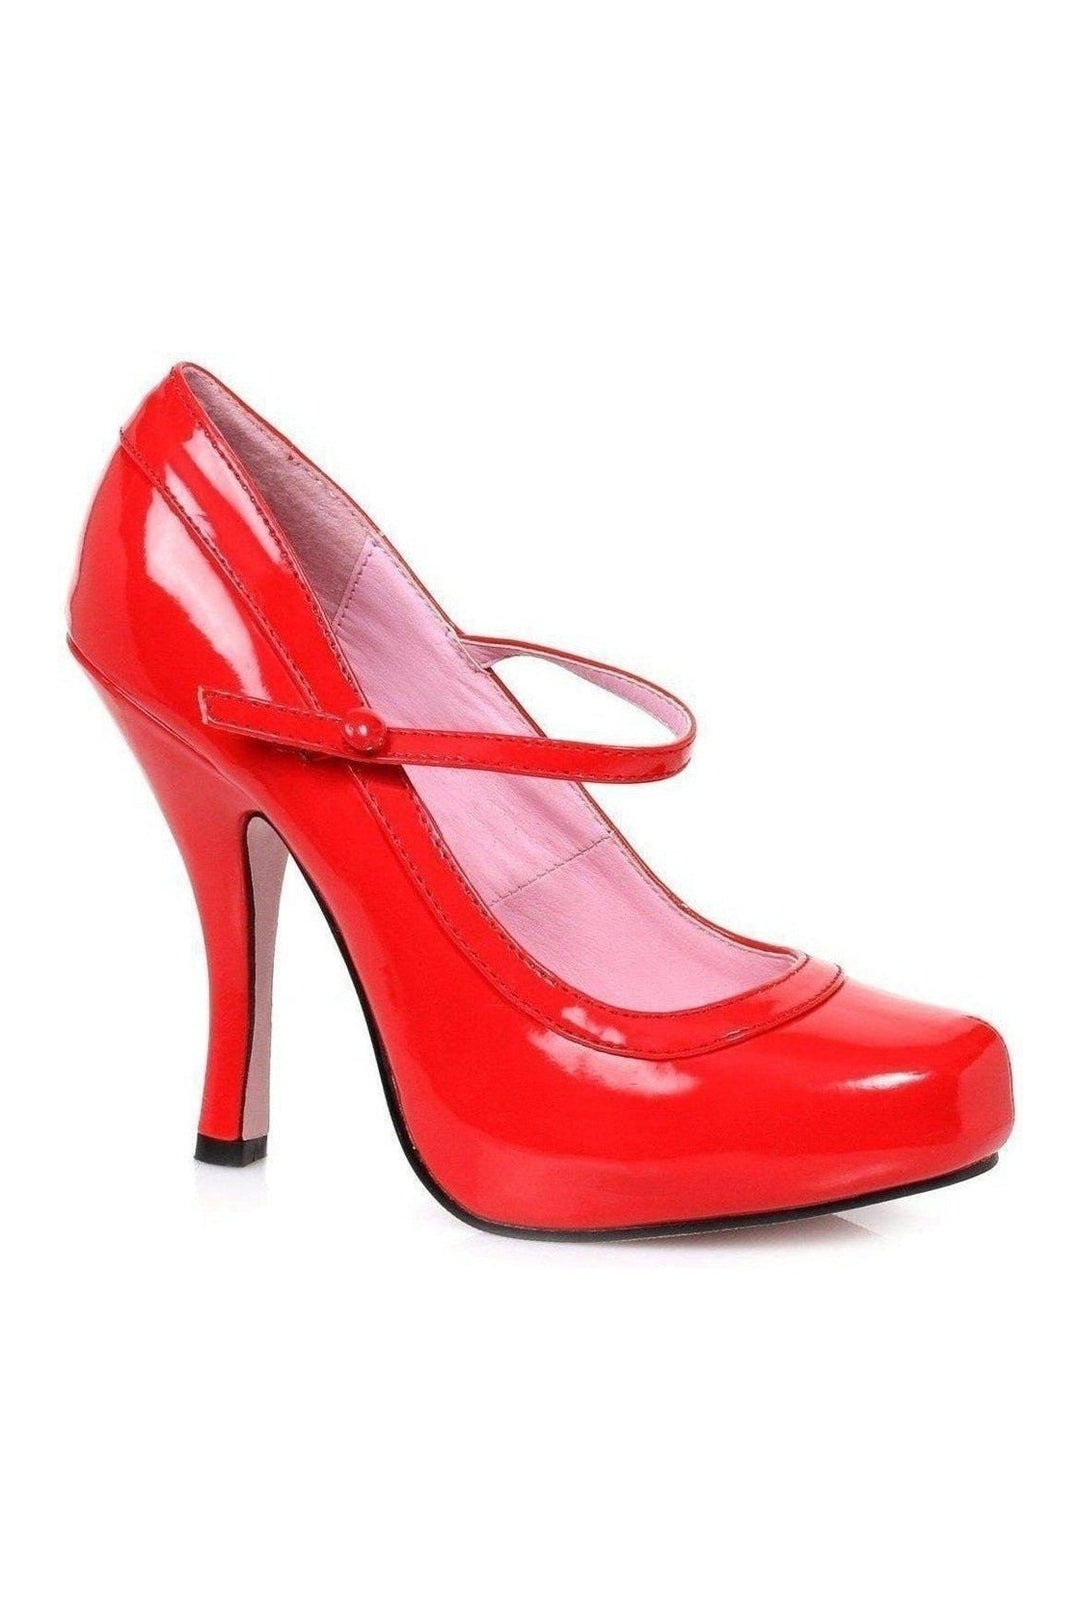 423-BABYDOLL Costume Pump | Red Patent-Ellie Shoes-SEXYSHOES.COM